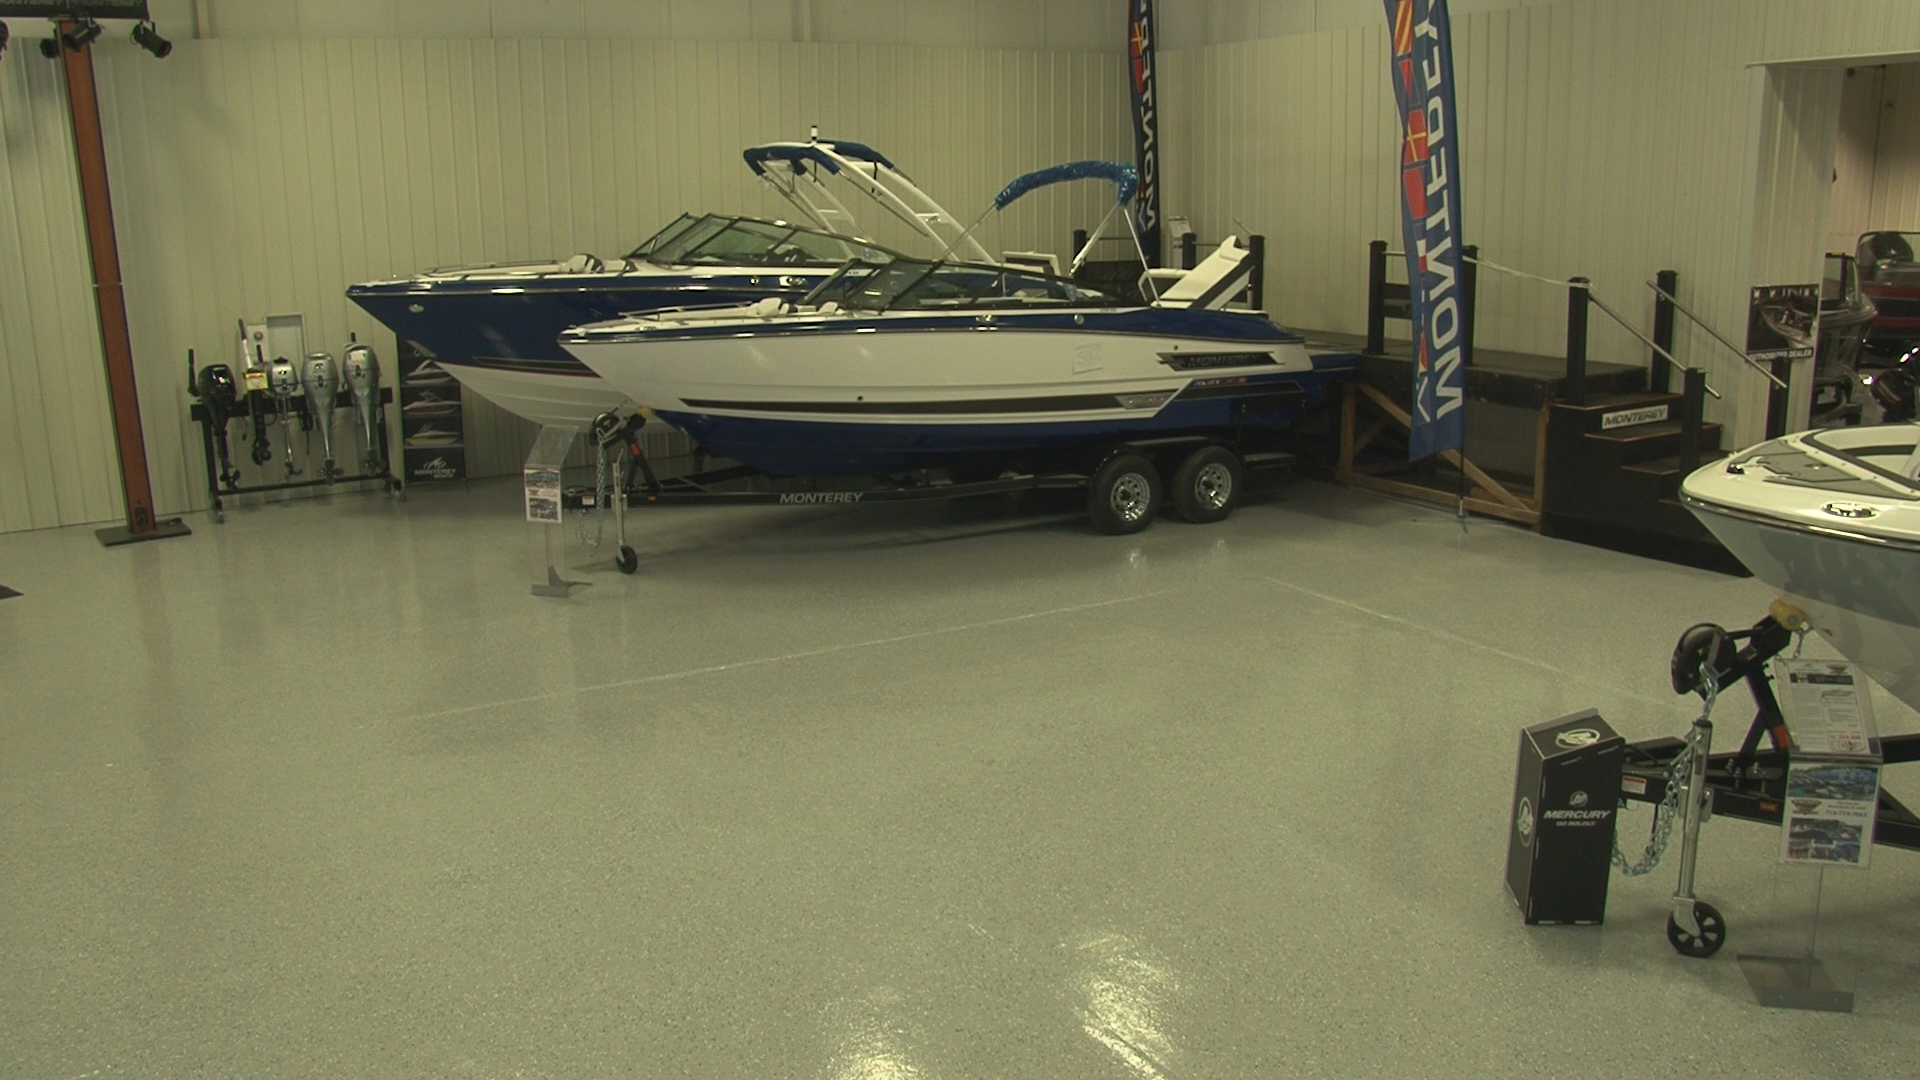 Western New York boat dealers and marinas seeing a lack of inventory